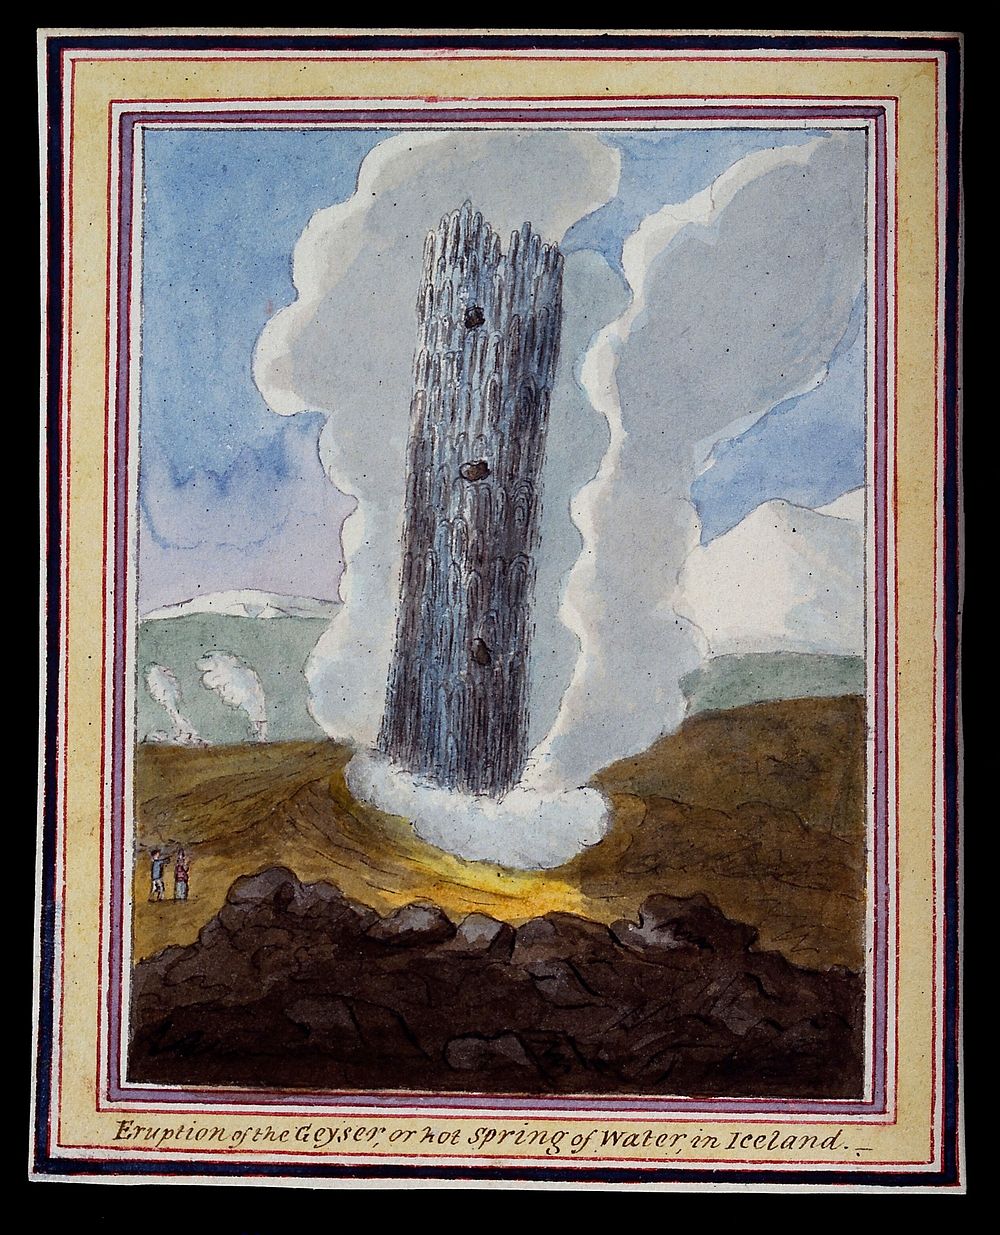 Iceland: a geyser or hot spring erupting. Watercolour.